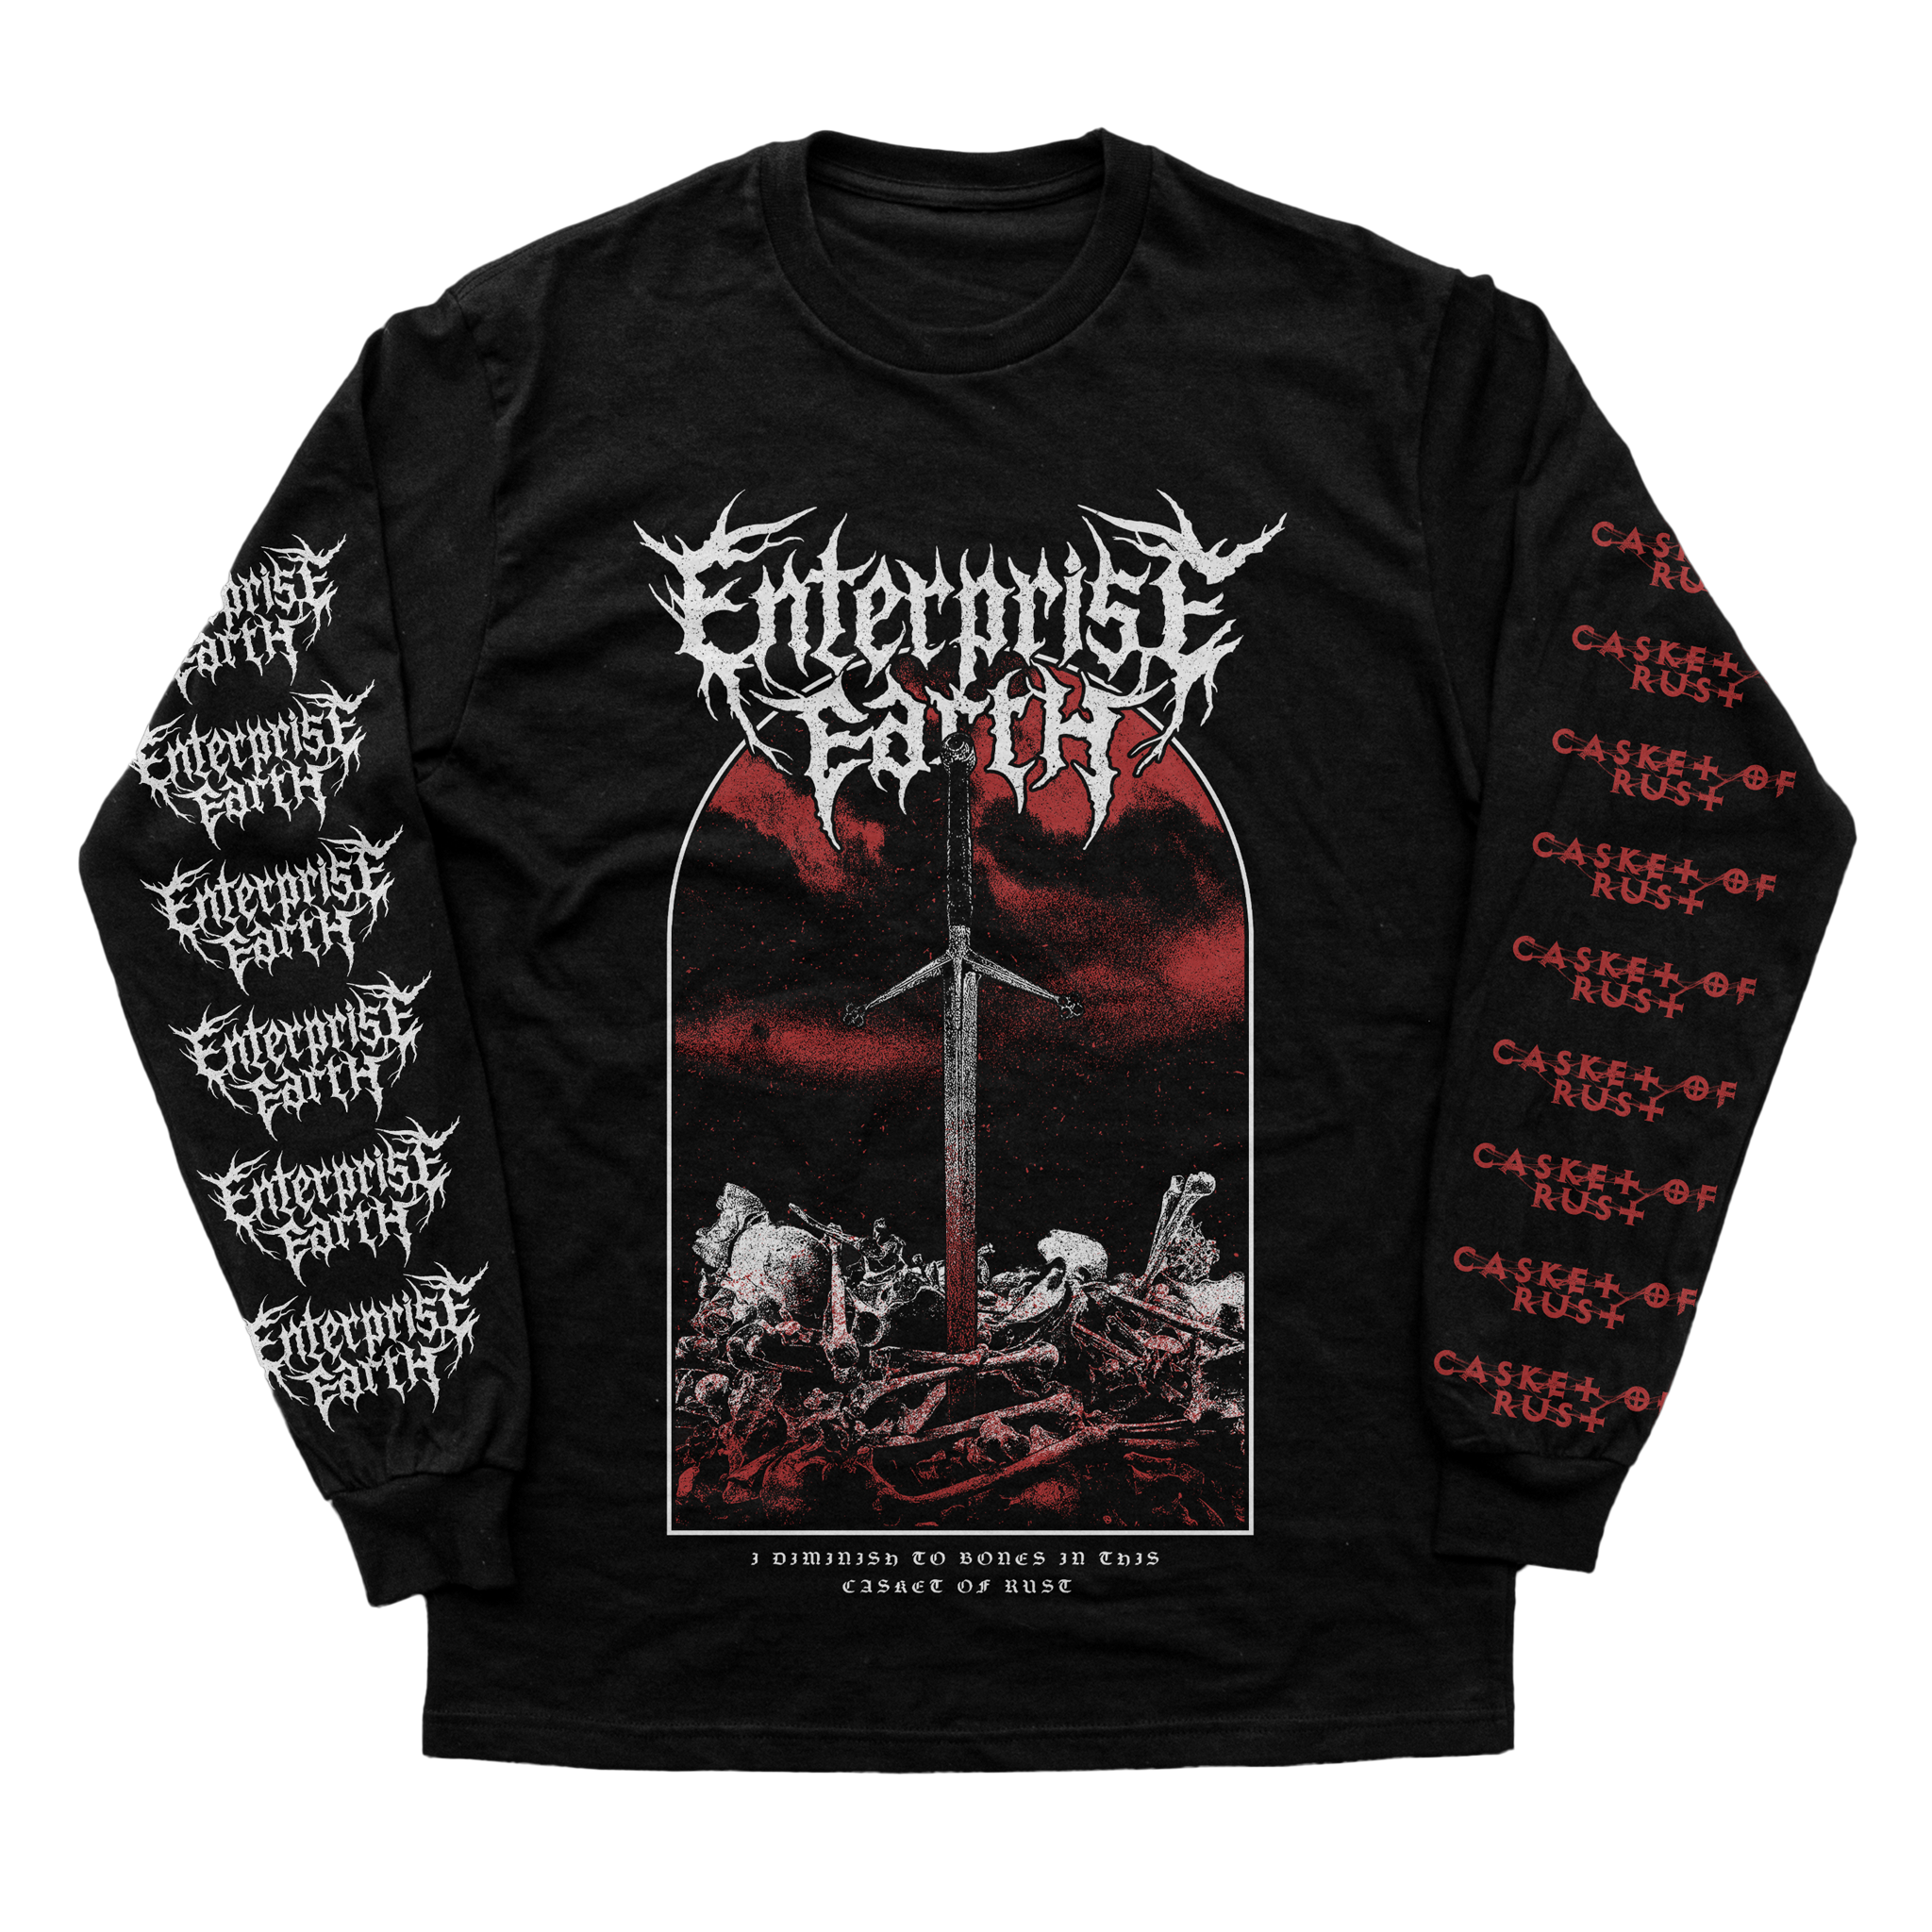 Enterprise Earth's Casket of Rust longsleeve available for pre-order. Stream Casket of Rust now.